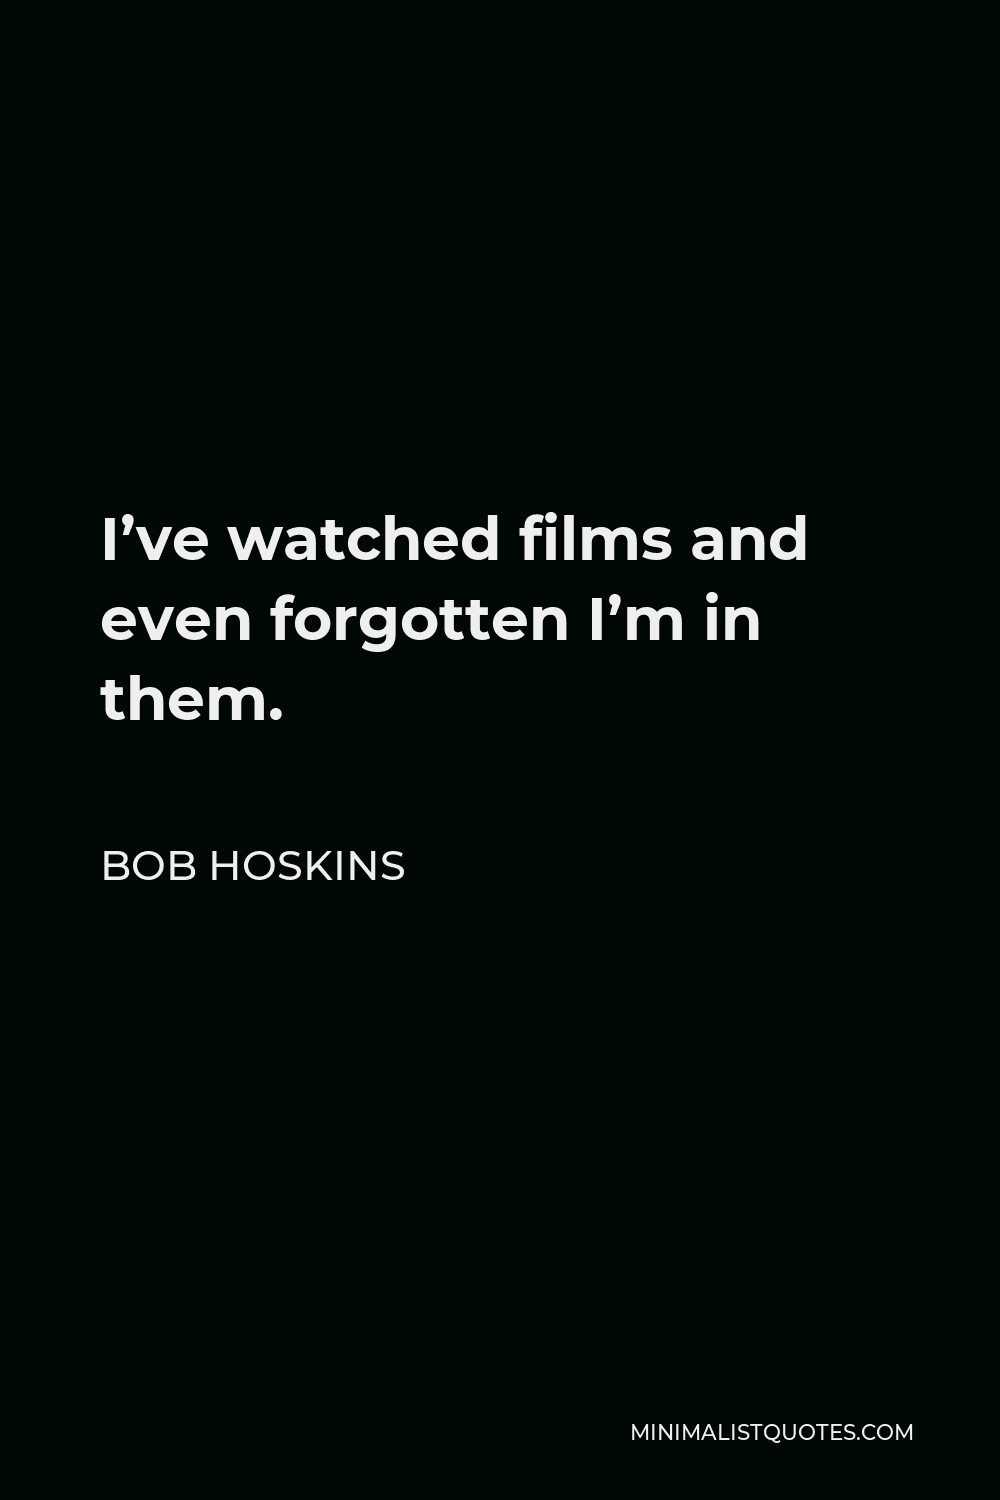 Bob Hoskins Quote - I’ve watched films and even forgotten I’m in them.